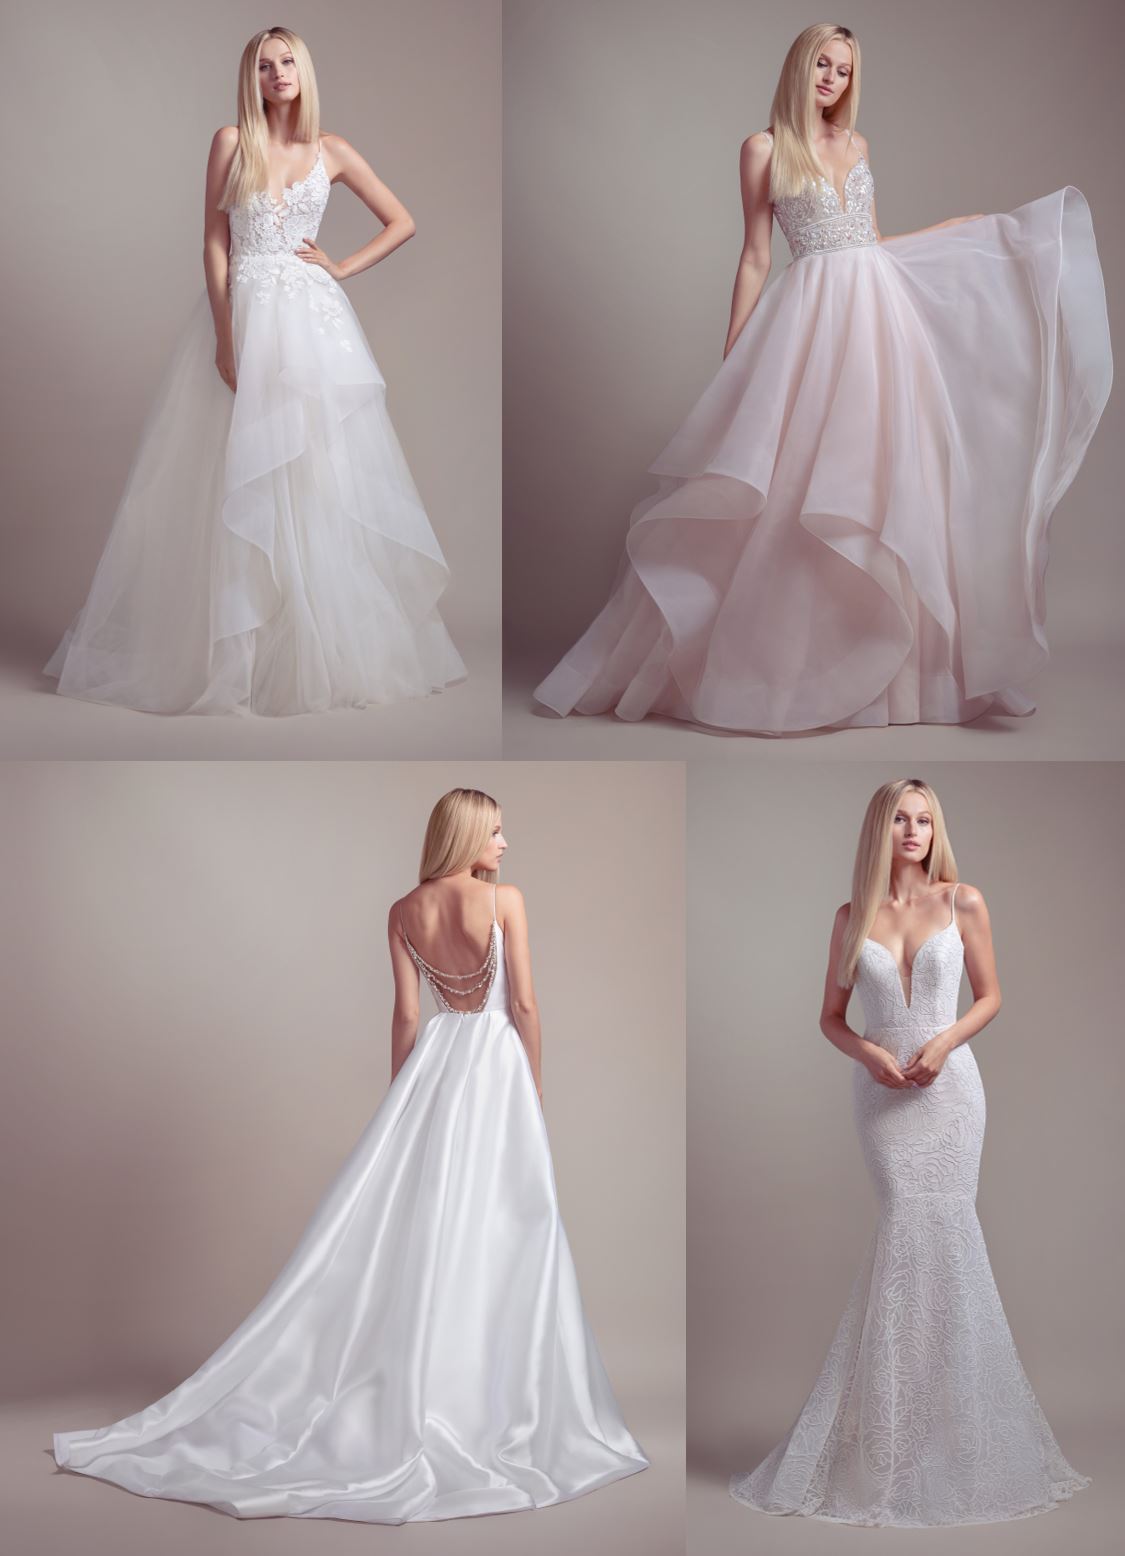 Blush by Hayley Paige Bridal Trunk Show from July 12th to 13th at Lotus Bridal Long Island, NY - Wedding Dresses Include Clover, Fawn, Soleil, Vanna, Finch, Jameson